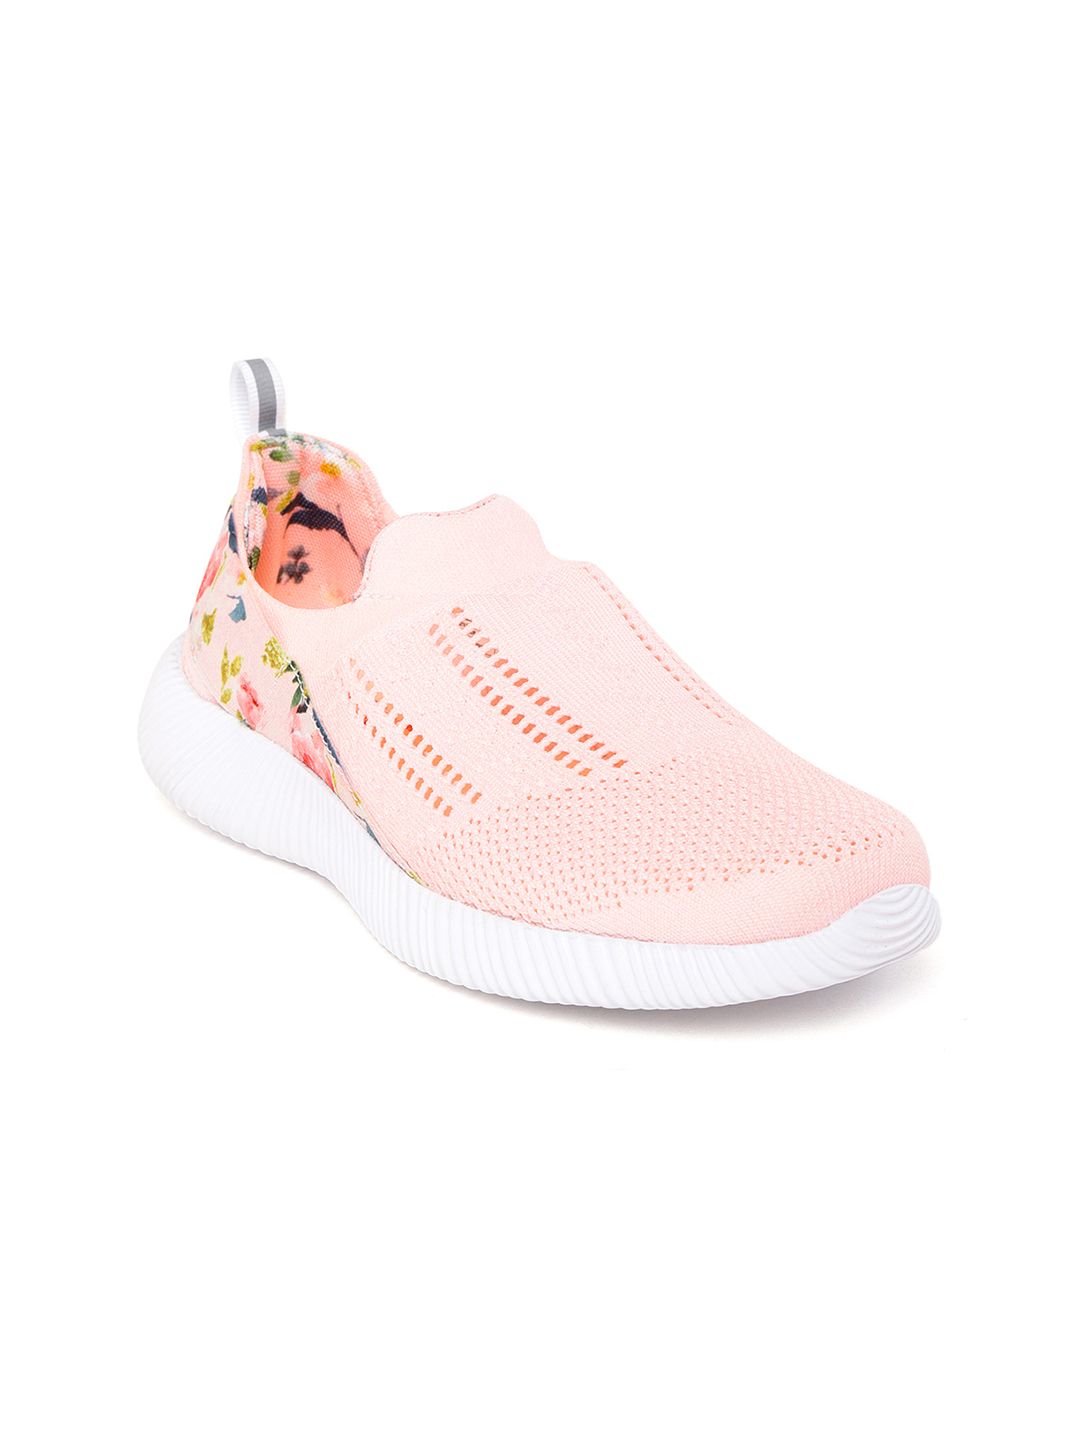 KazarMax Women Peach-Coloured Solid Training Slip-On Shoes Price in India